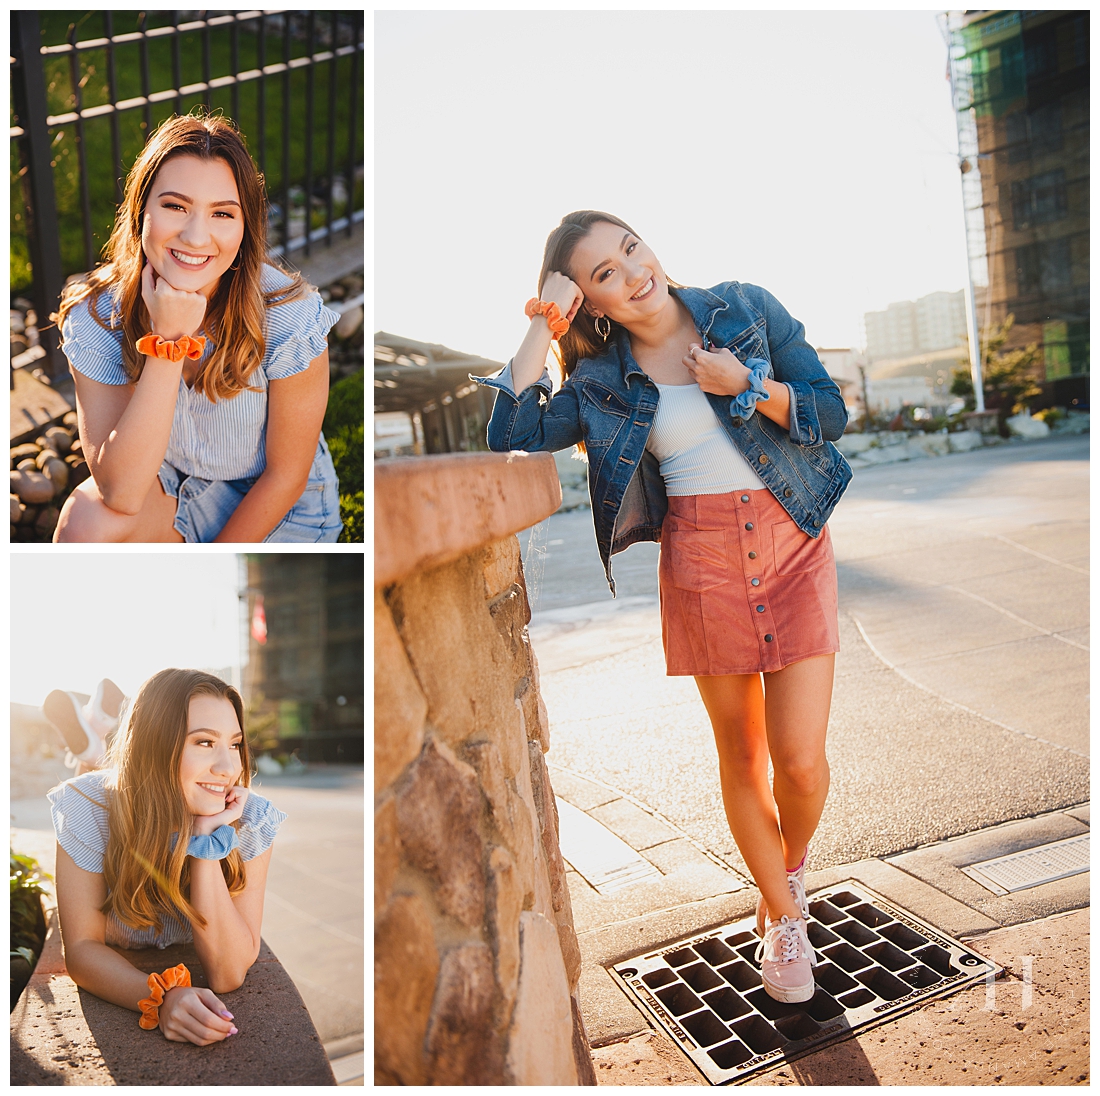 Fun Senior Portraits with Cute Outfit Inspiration | Photographed by Tacoma Photographer Amanda Howse